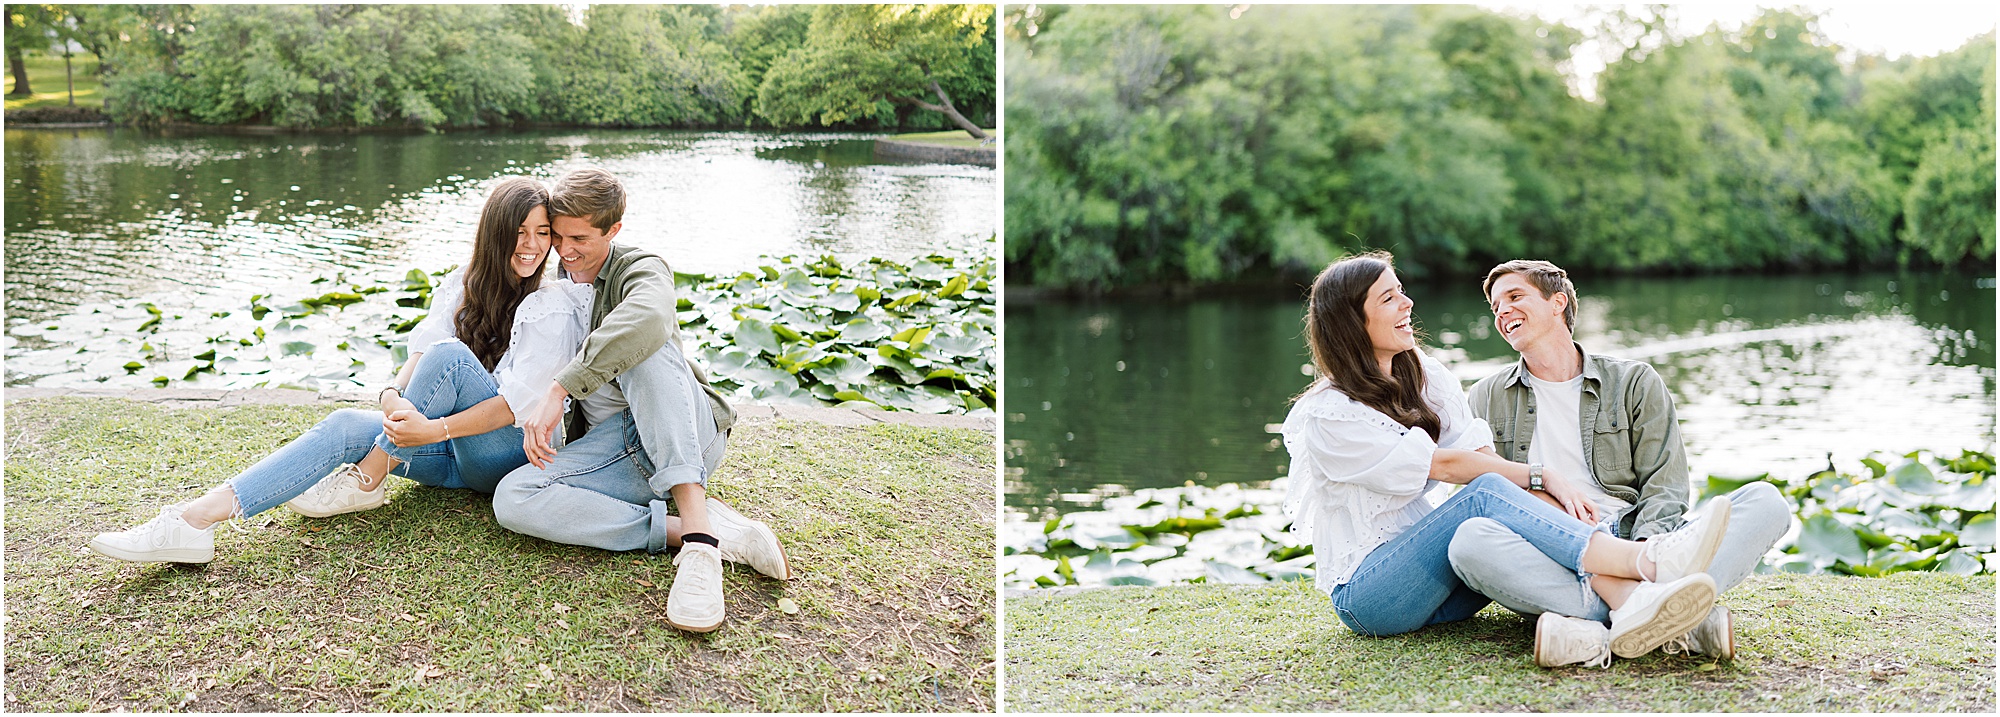 Engagement Session | Engagement Photos Dallas, Texas | Texas Wedding Photographer | Bailee Starr Photography 